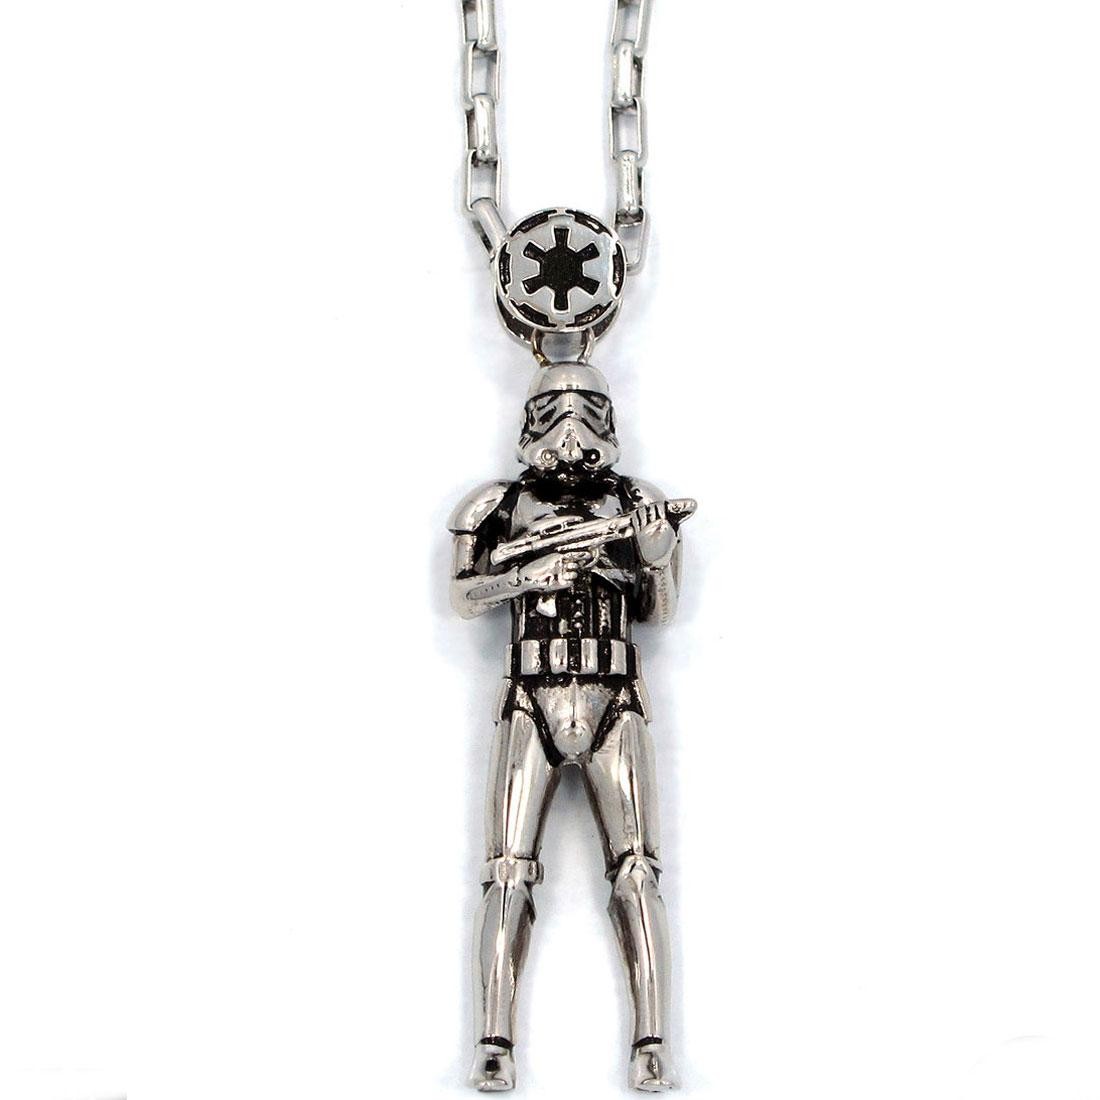 Han Cholo x Star Wars Stormtrooper Pendant Necklace (silver)